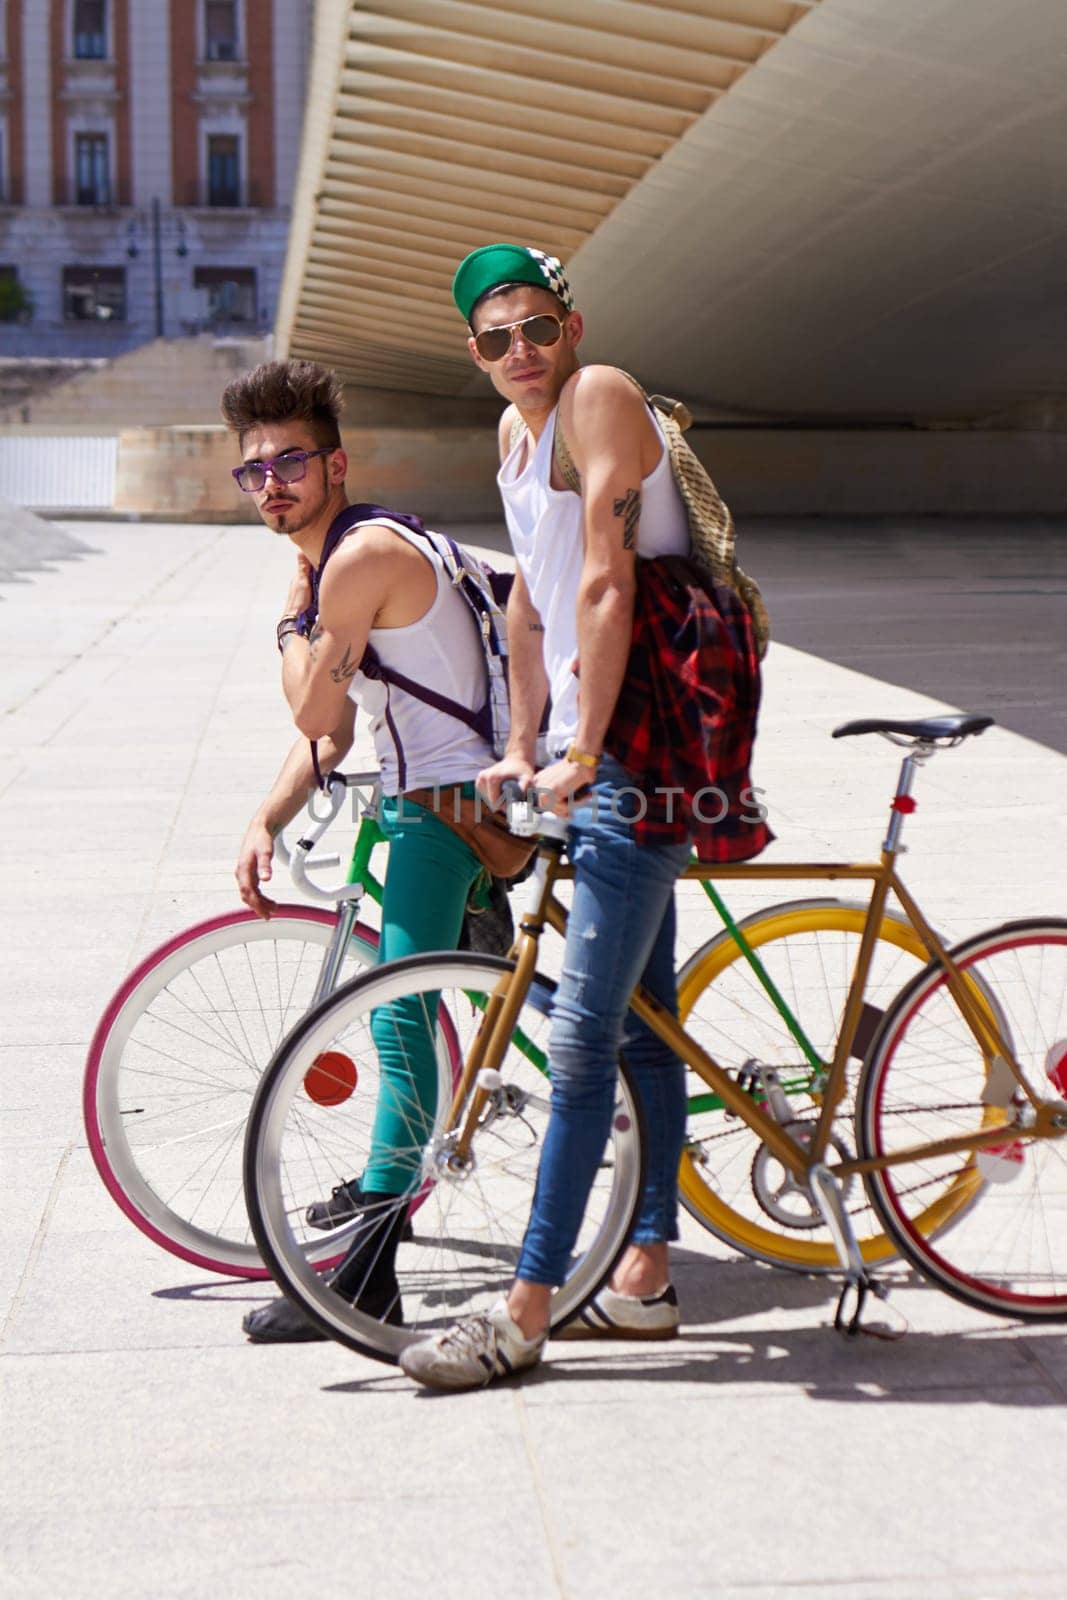 Bicycle, portrait and friends or men in city streetwear for college, university or outdoor travel in summer. Cool youth or people with gen z fashion, sunglasses and bike for urban transport at campus by YuriArcurs